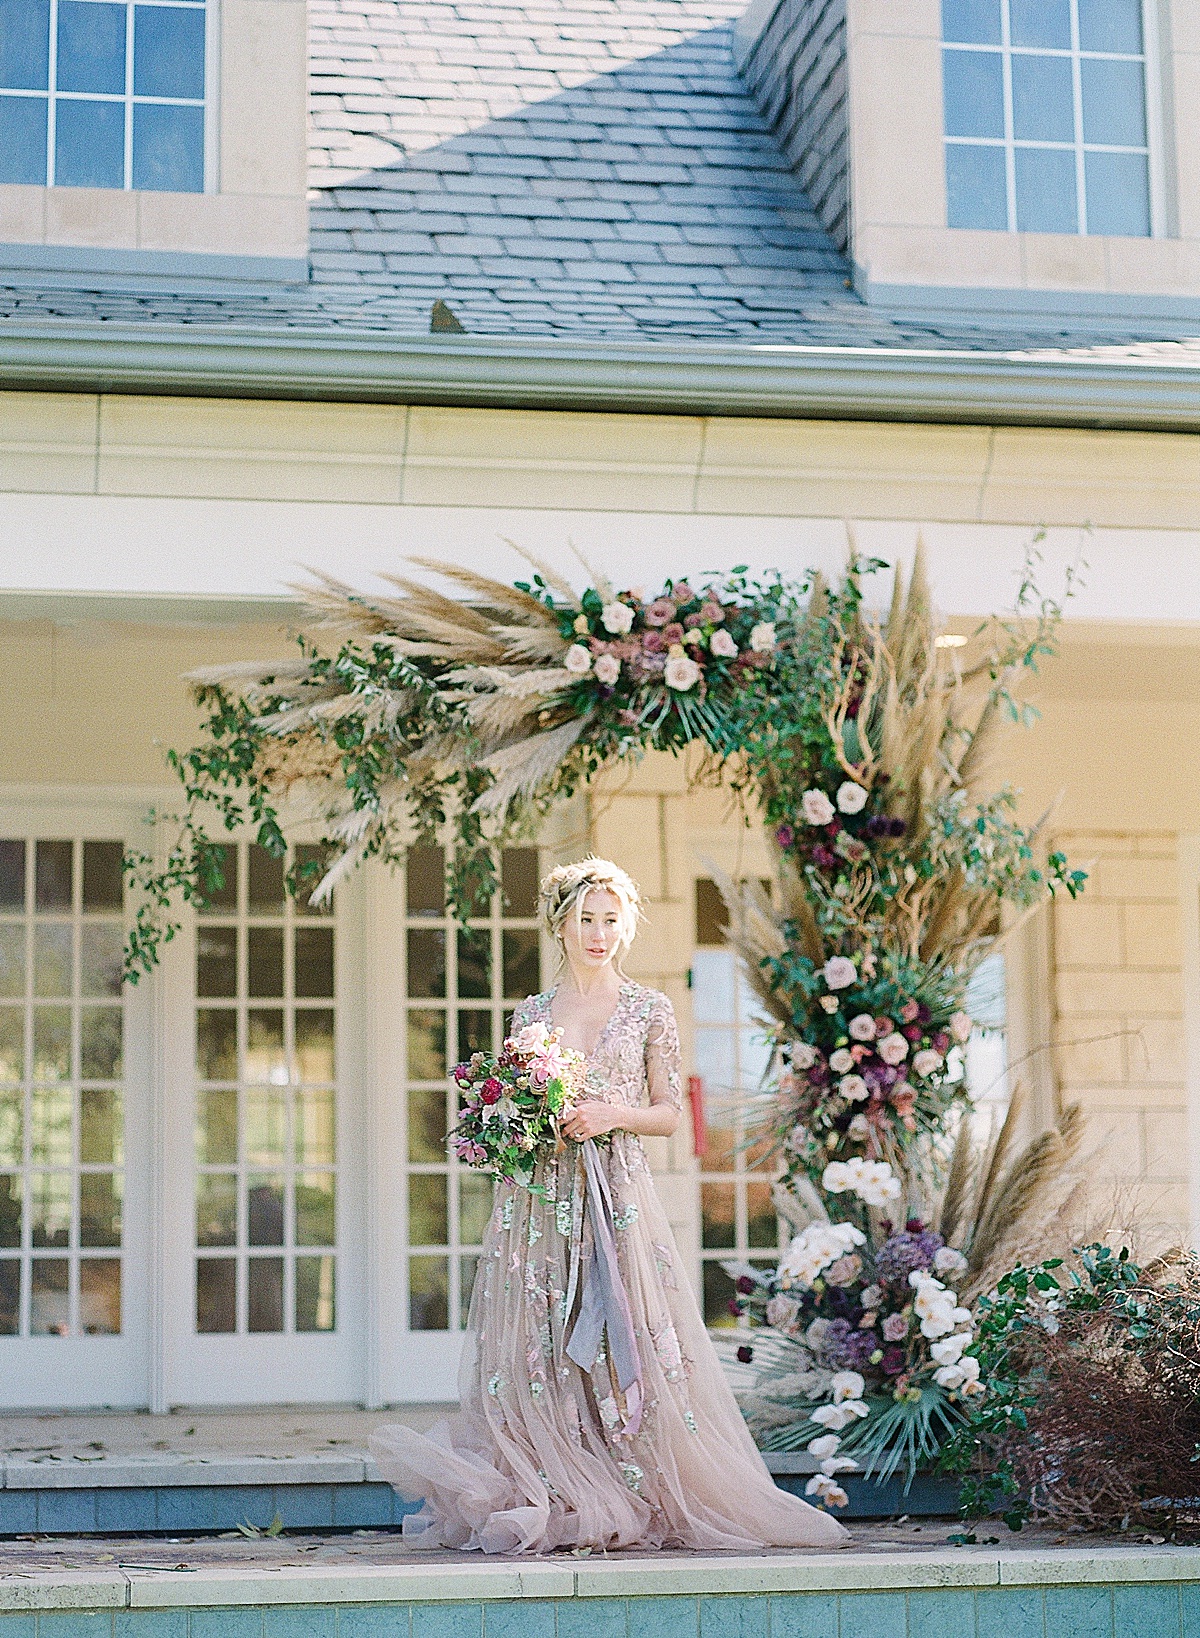 Lavender Wedding Dress Inspiration shoot Bride at ceremony site surrounded by florals photo